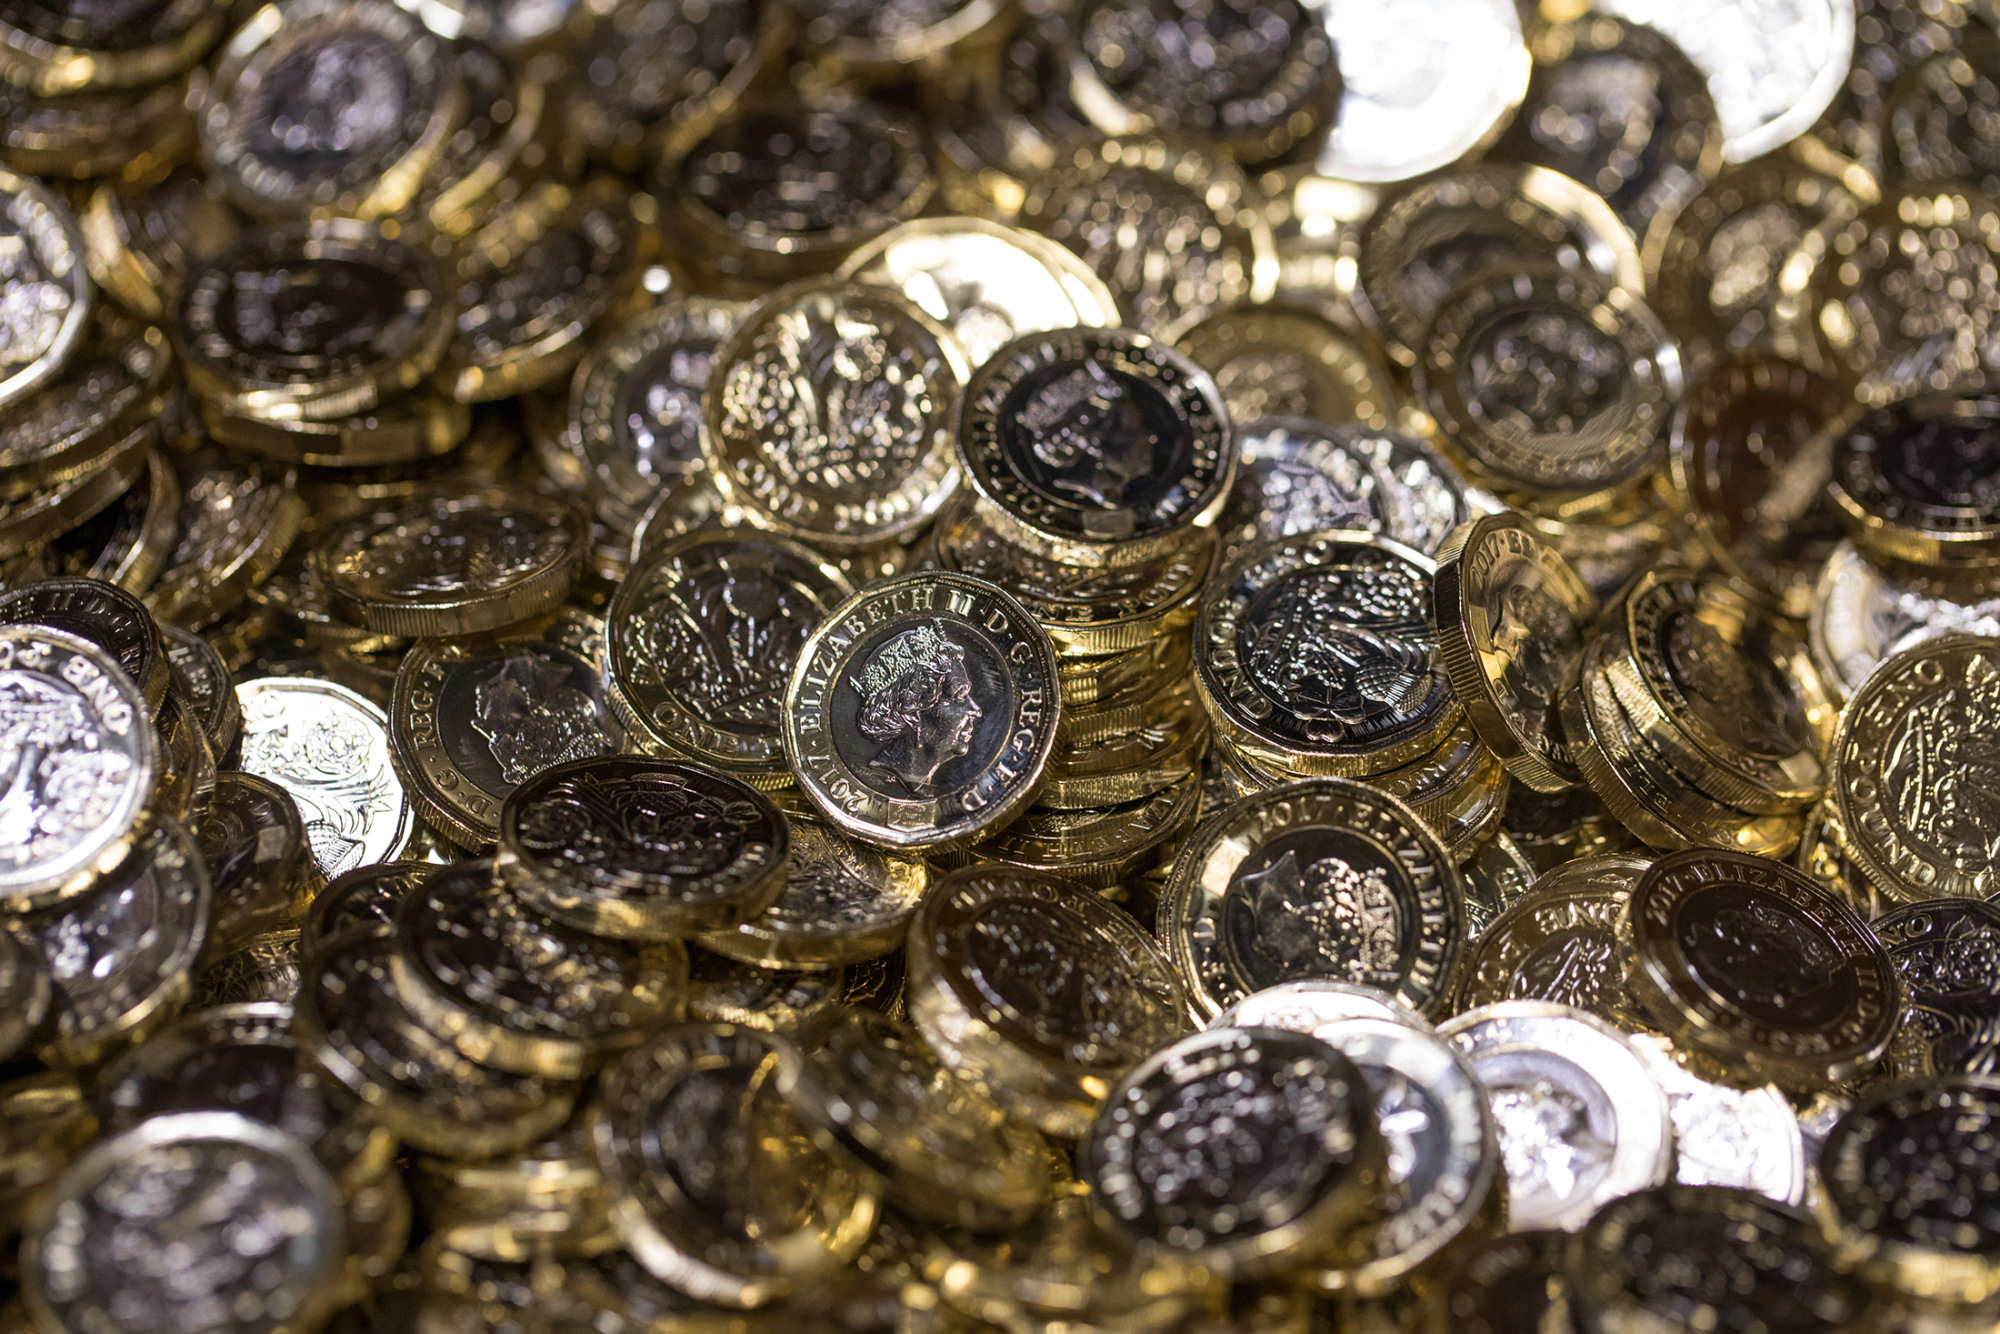 New British £1 coins have been stockpiled for the launch this week.
